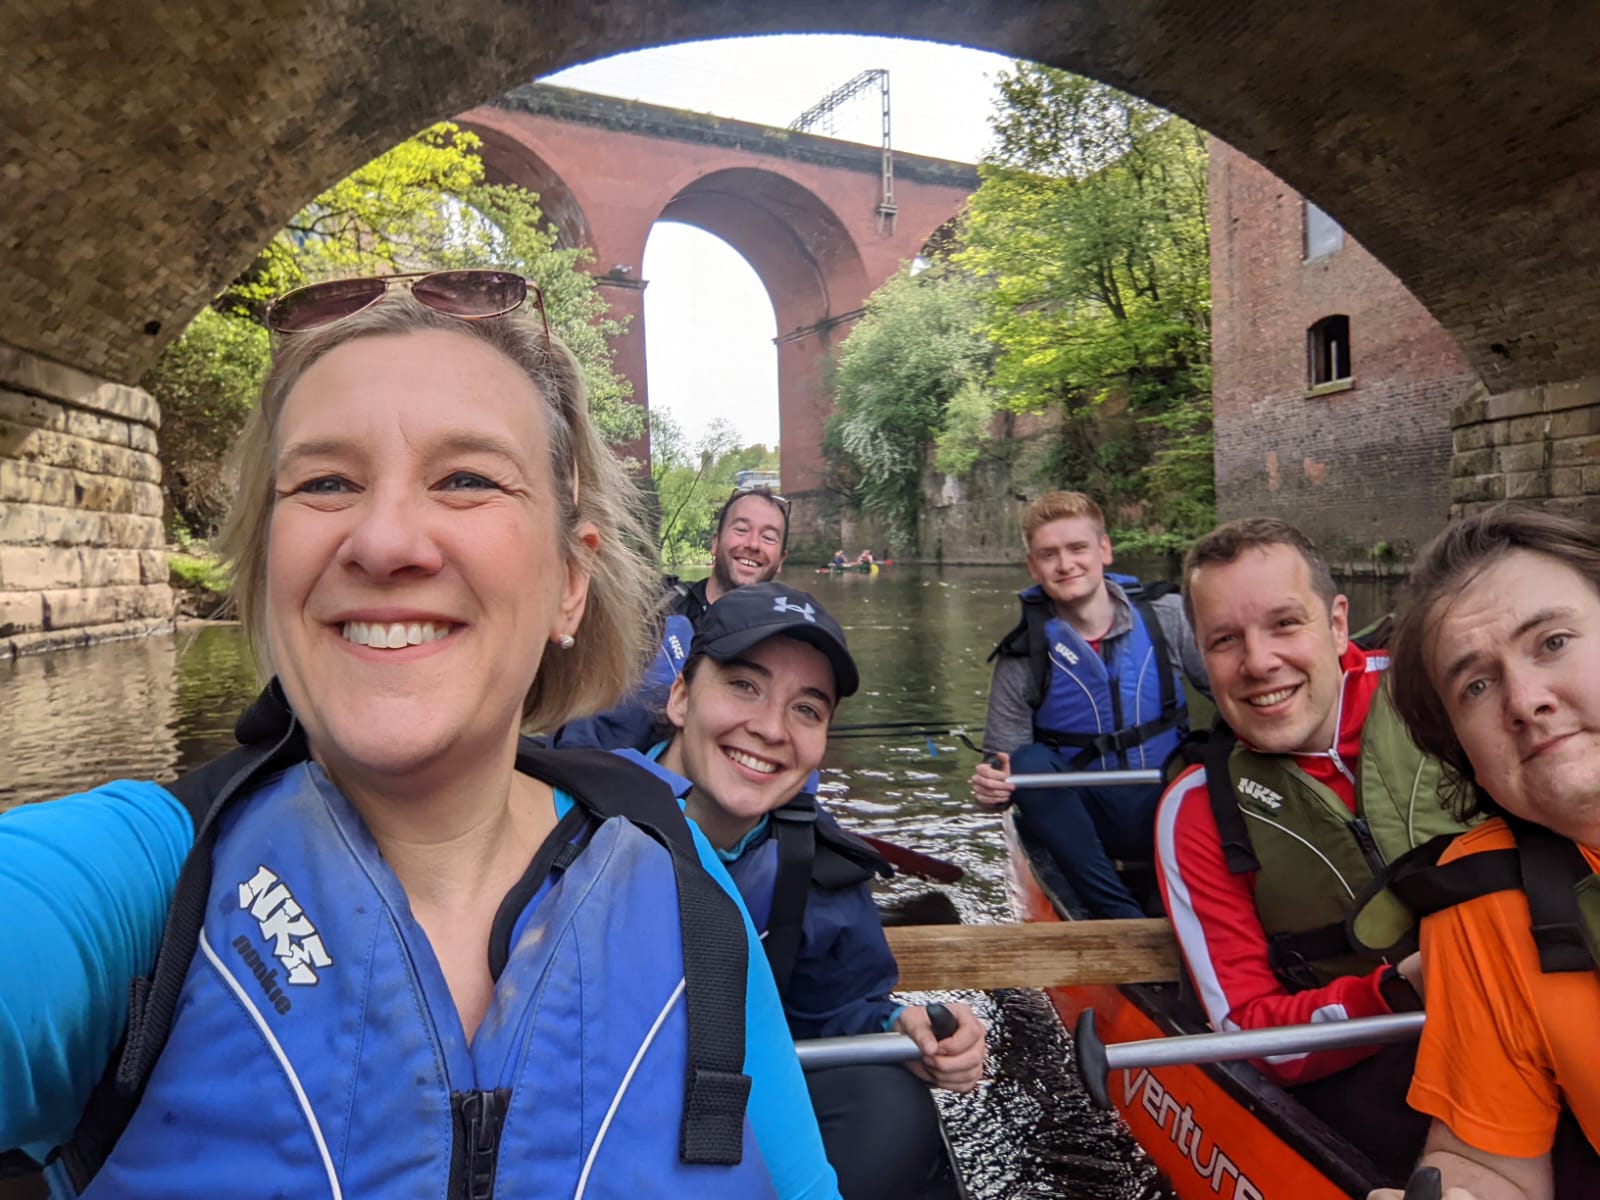 A team of 6 from Stockport Council take a selfie on the charity canoe challenge underneath Stockport's viaduct; their paddles in hand as they canoe on the River Mersey